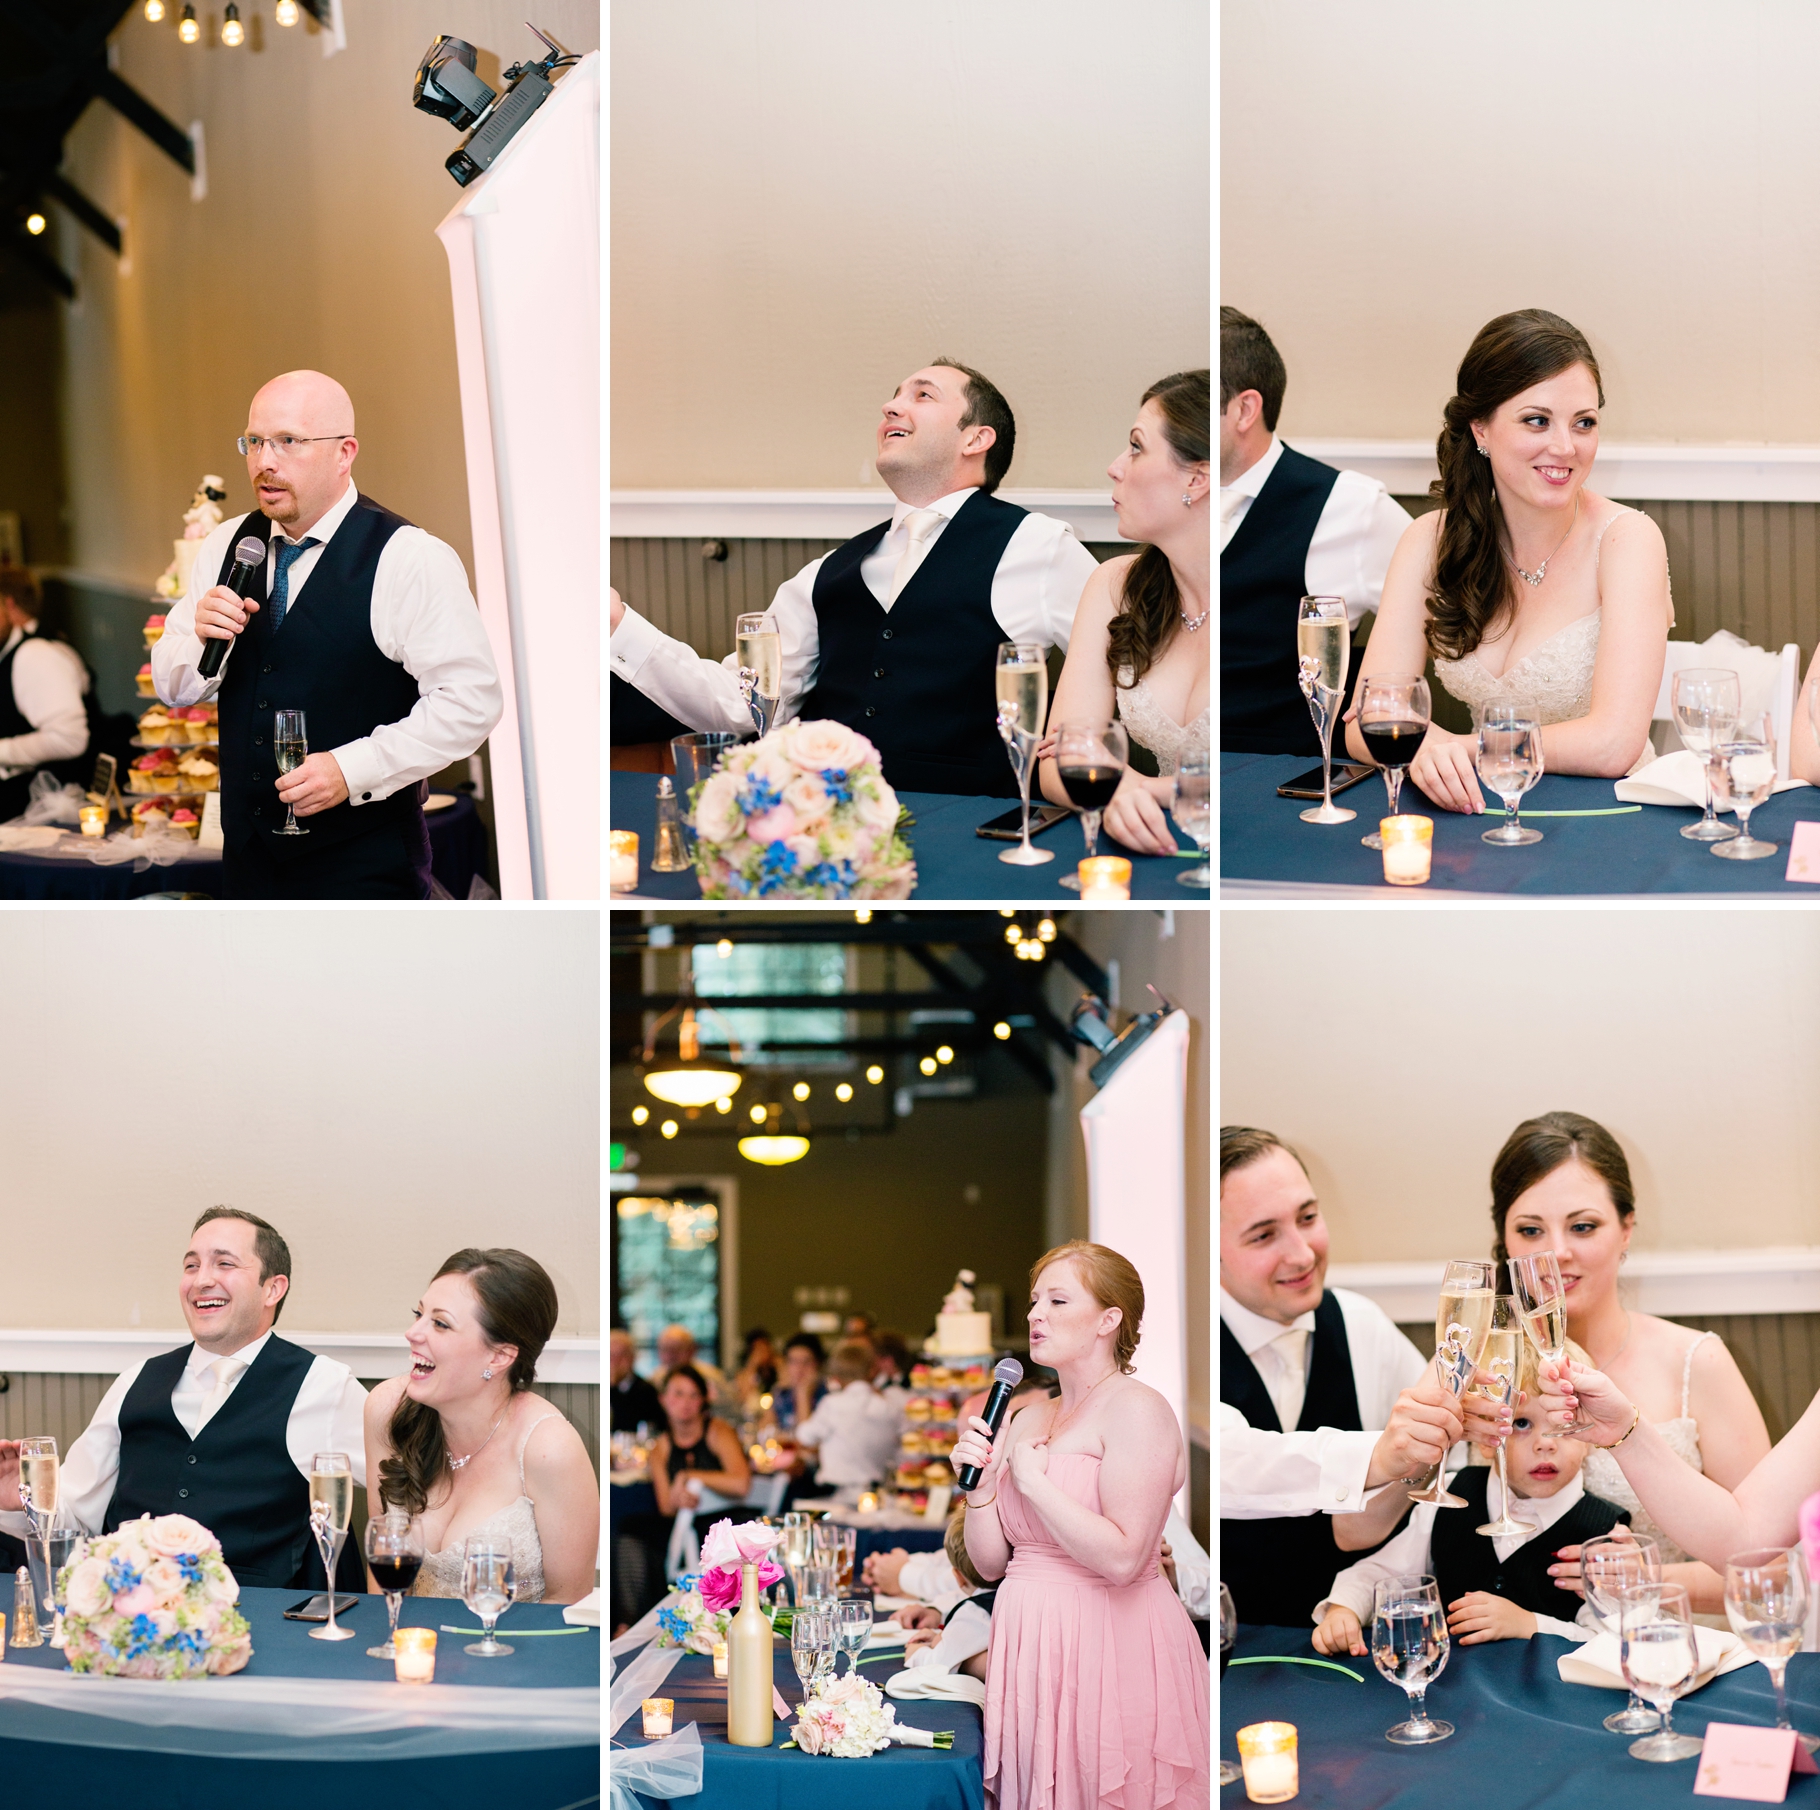 44-Reception-Toasts-Hidden-Meadows-Snohomish-Wedding-Photographer-Northwest-Seattle-Photography-by-Betty-Elaine